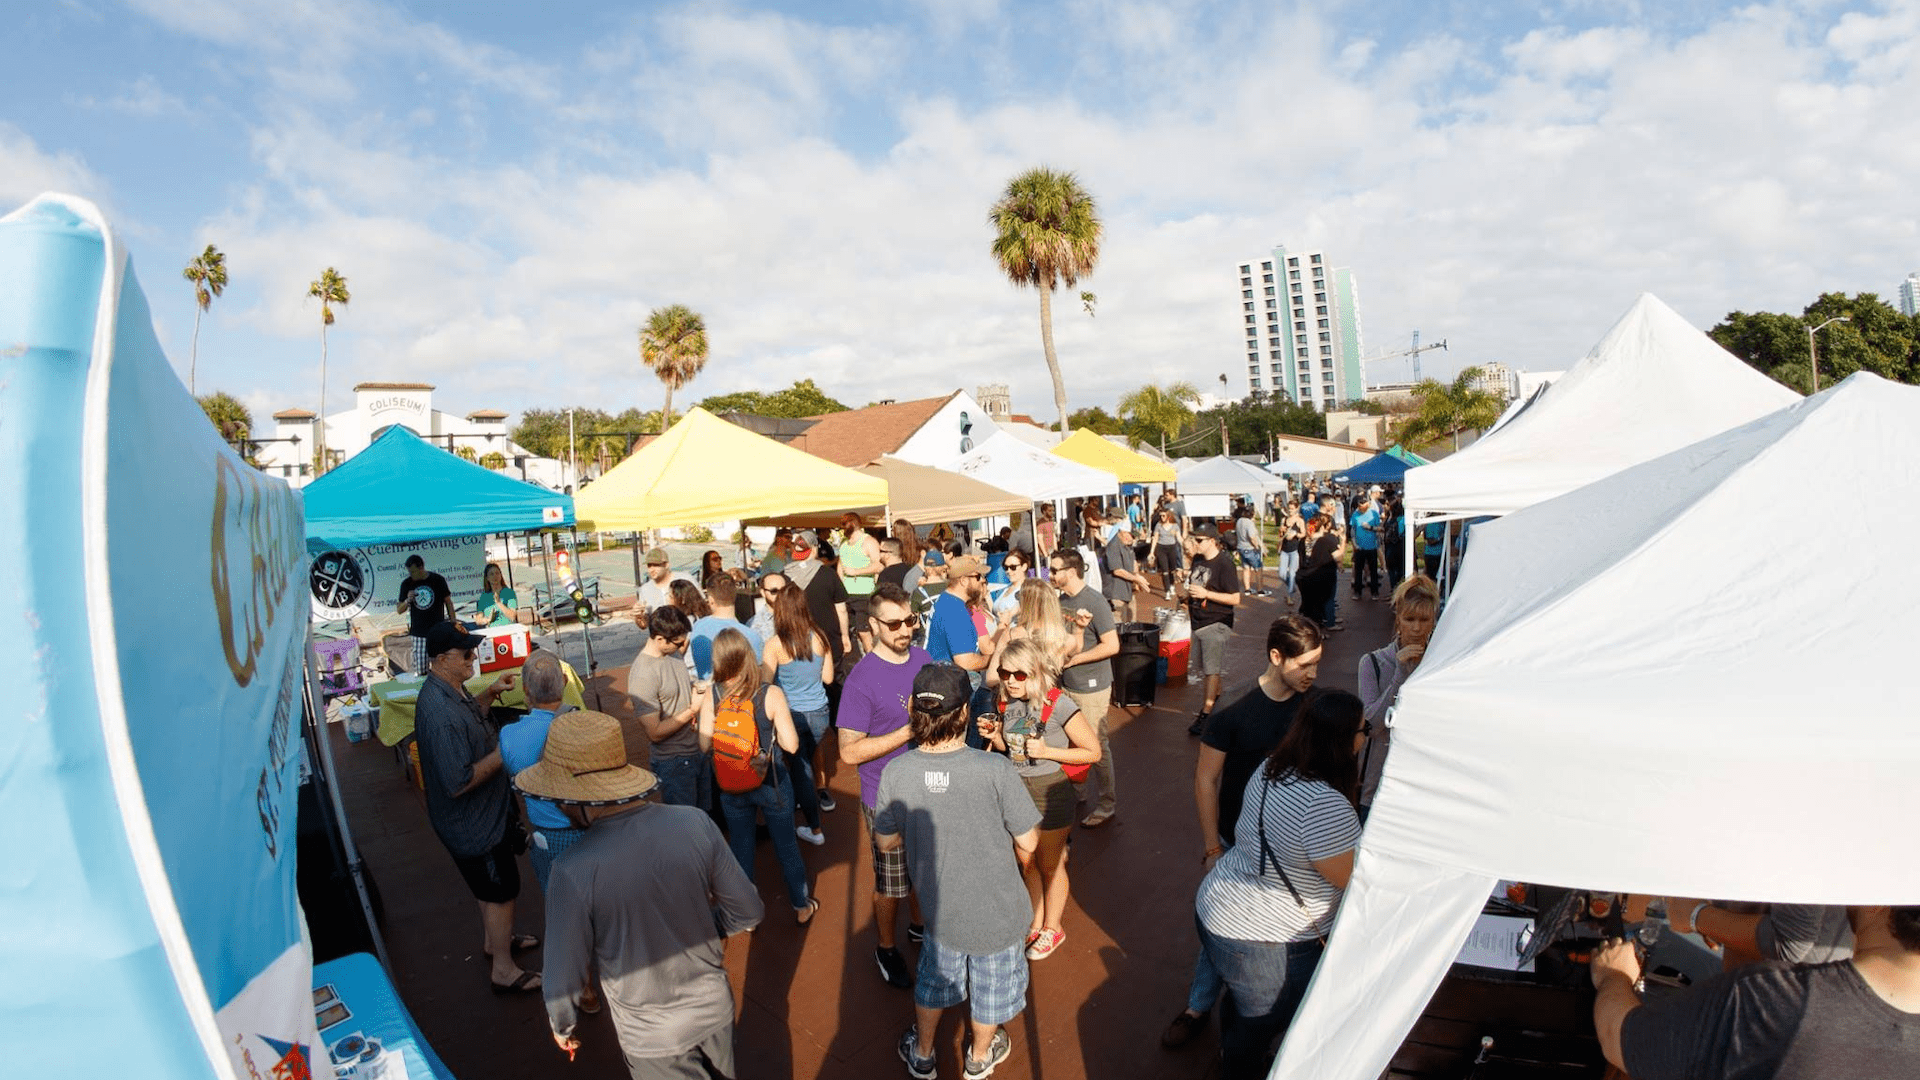 Florida Craft Beer Festival returns to Tampa - That's So Tampa